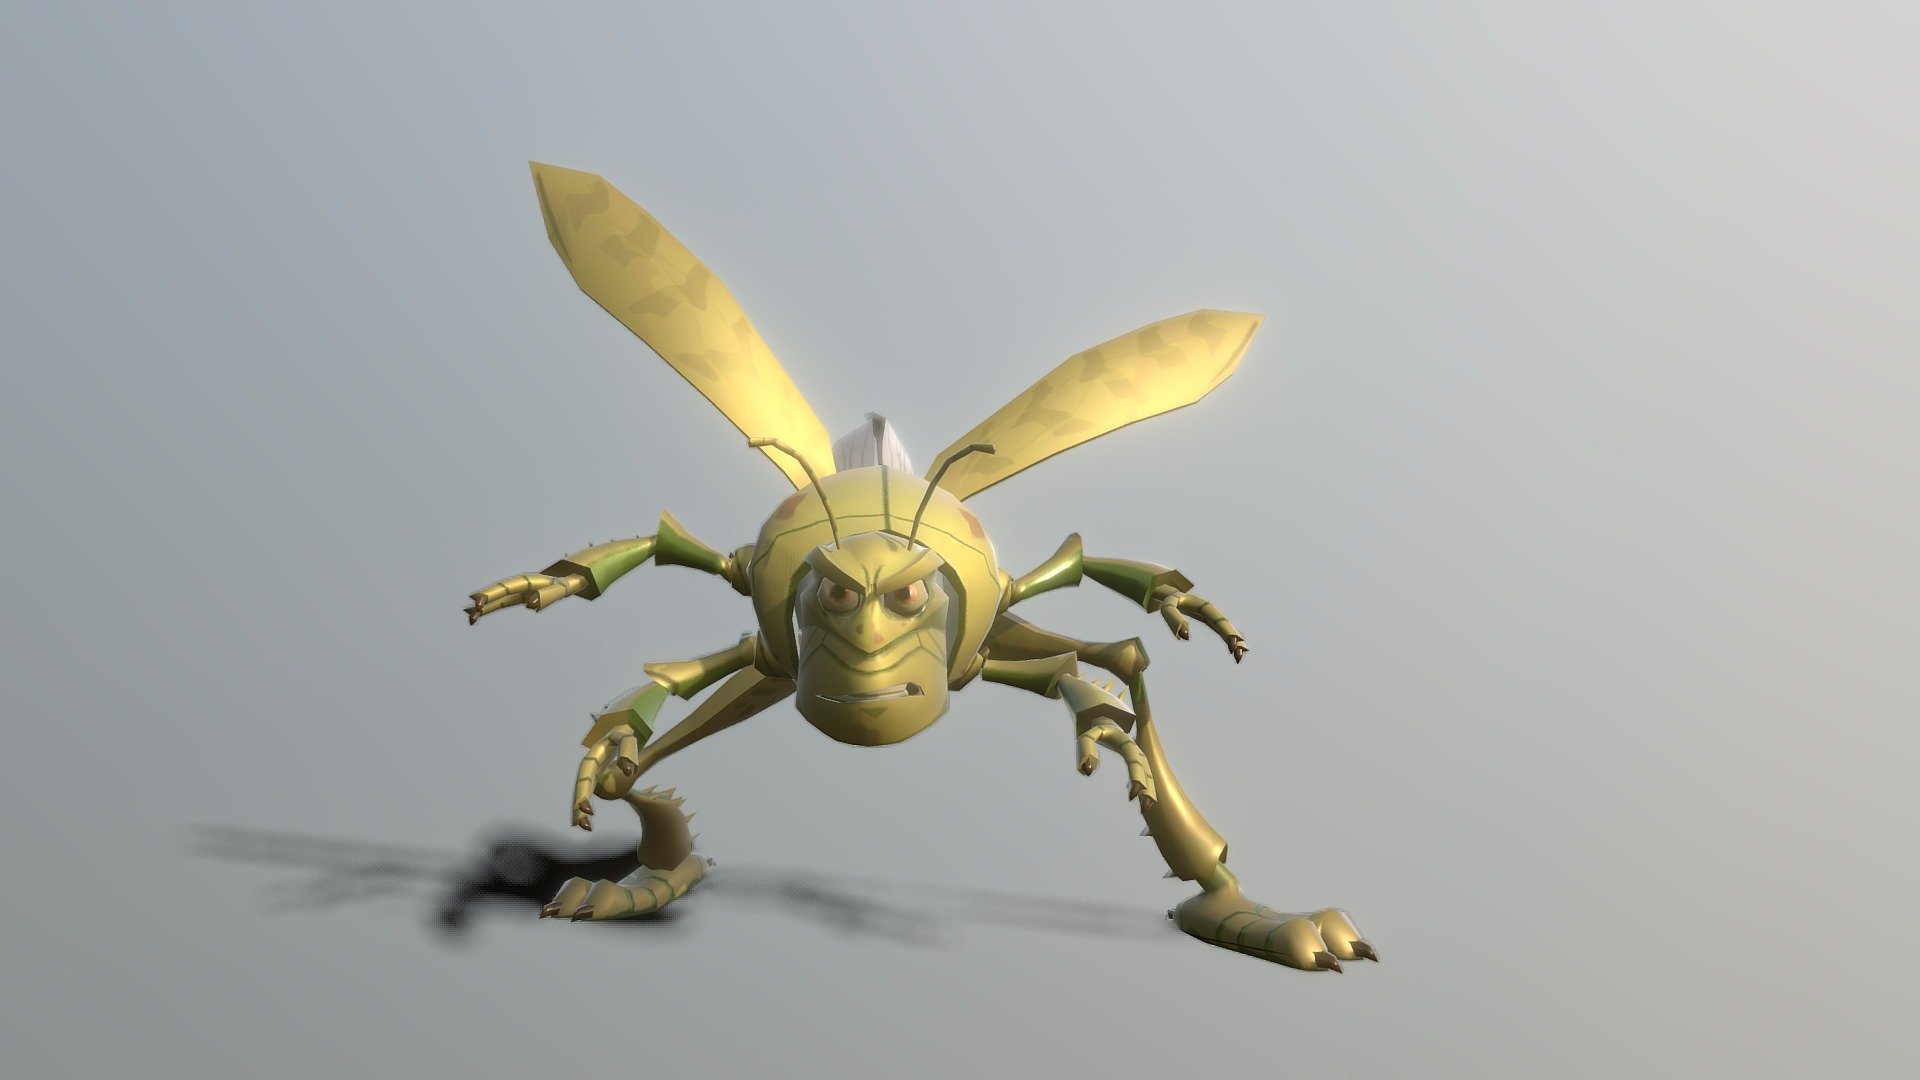 This is hopper from the Disney movie Bugs Life and hes a villian and ended up getting eaten by a bird. Hopper is a villain because he trys to kill ants and turning ants into slaves. He is afraid of birds because grasshoppers is a top of the birds food chain 3d model